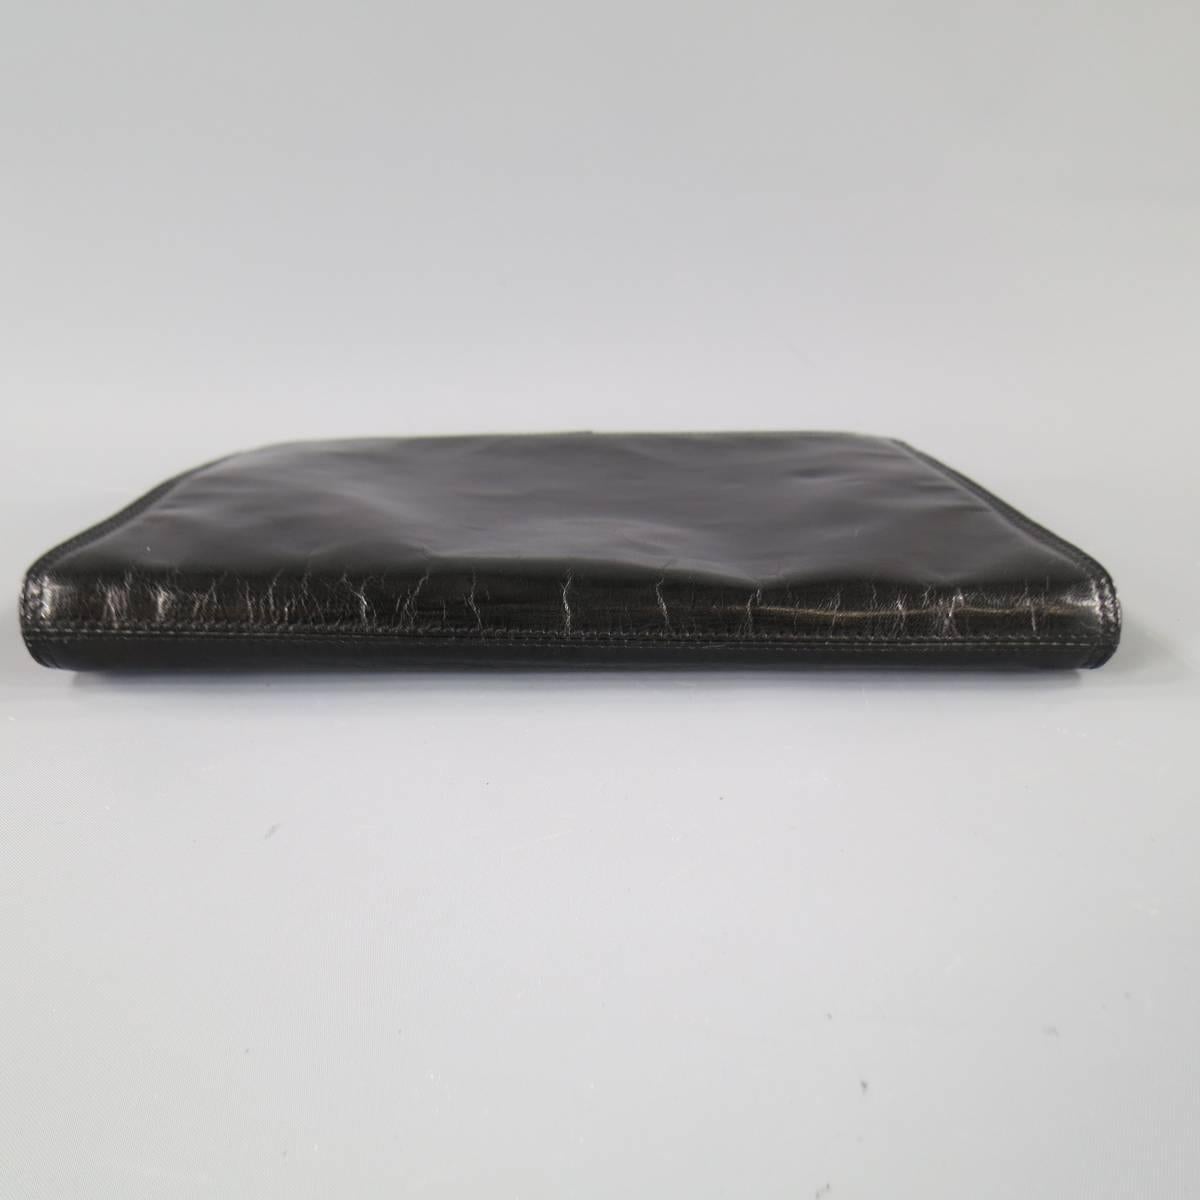 This vintage BOTTEGA VENETA clutch comes in smooth shiny black leather with a clip lock closure, leather lining with zip pocket and brown engraved mirror. Made in Italy.
 
Excellent Pre-Owned Condition.
 
Measurements:
 
Length: 11.25